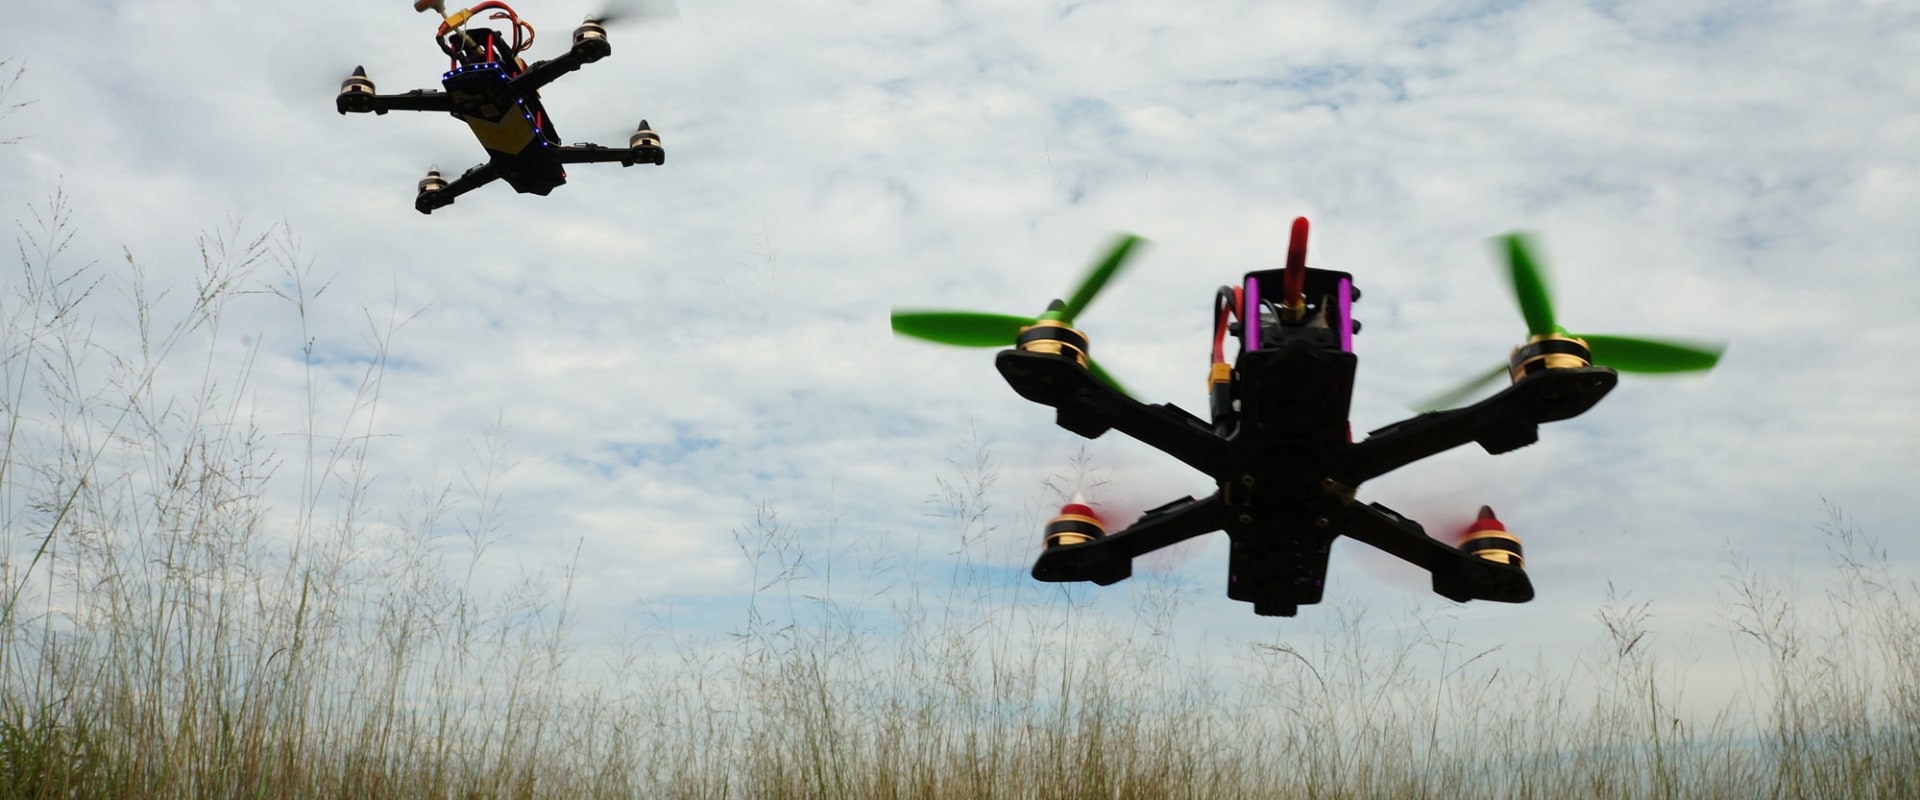 All About FPV Flying: Uses and Applications in Recreational Settings